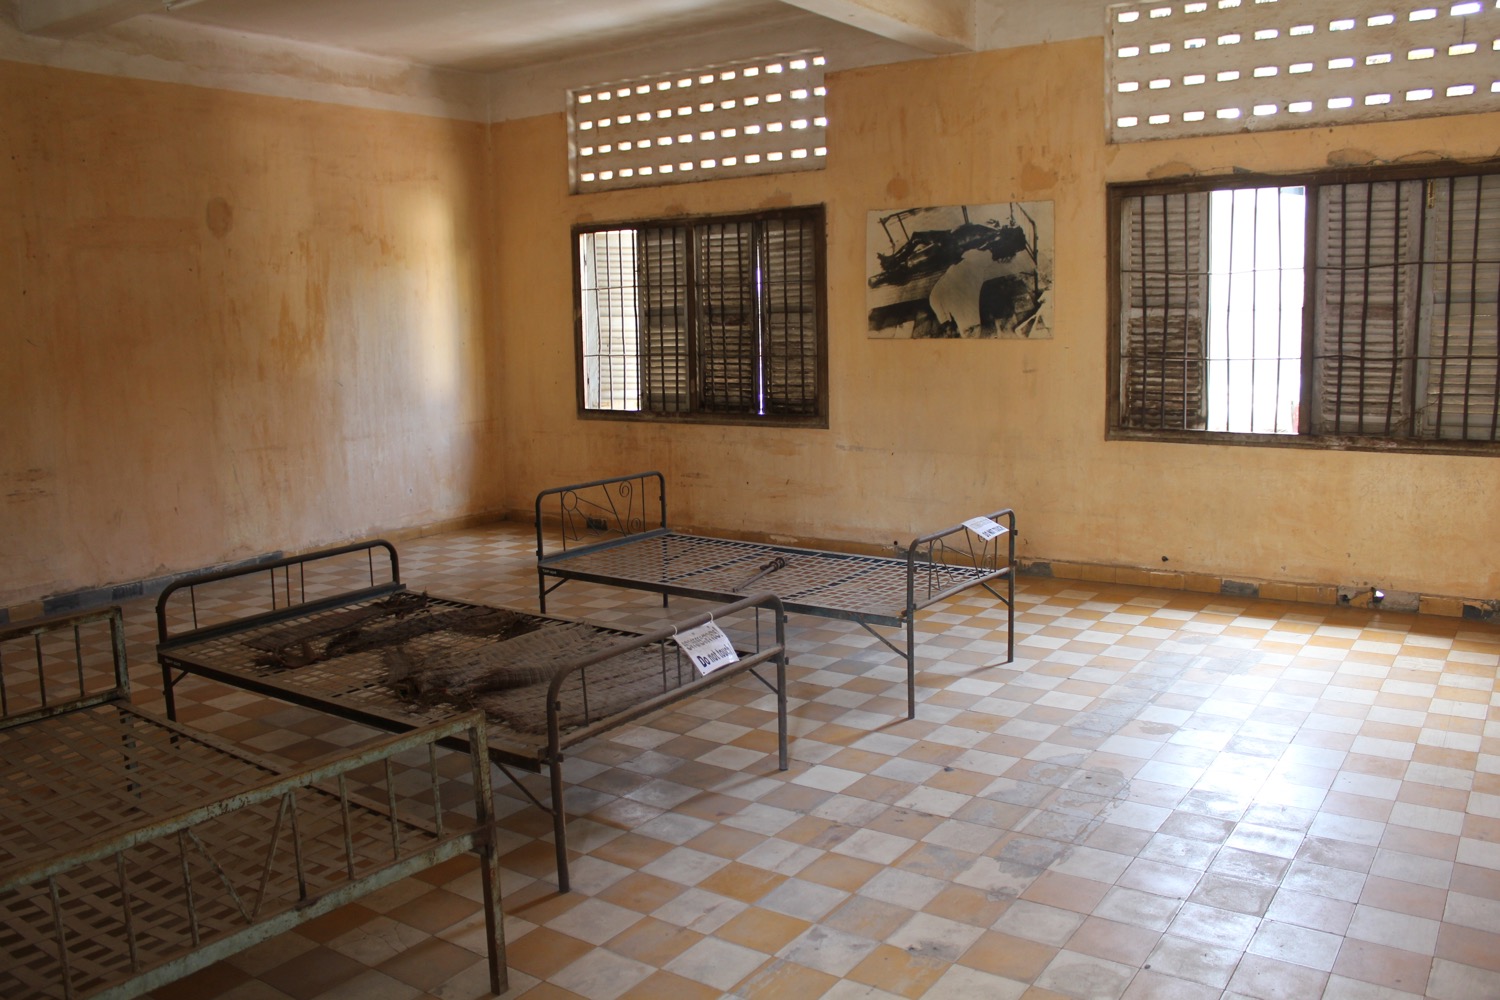 Tuol Sleng Genocide Museum - 7